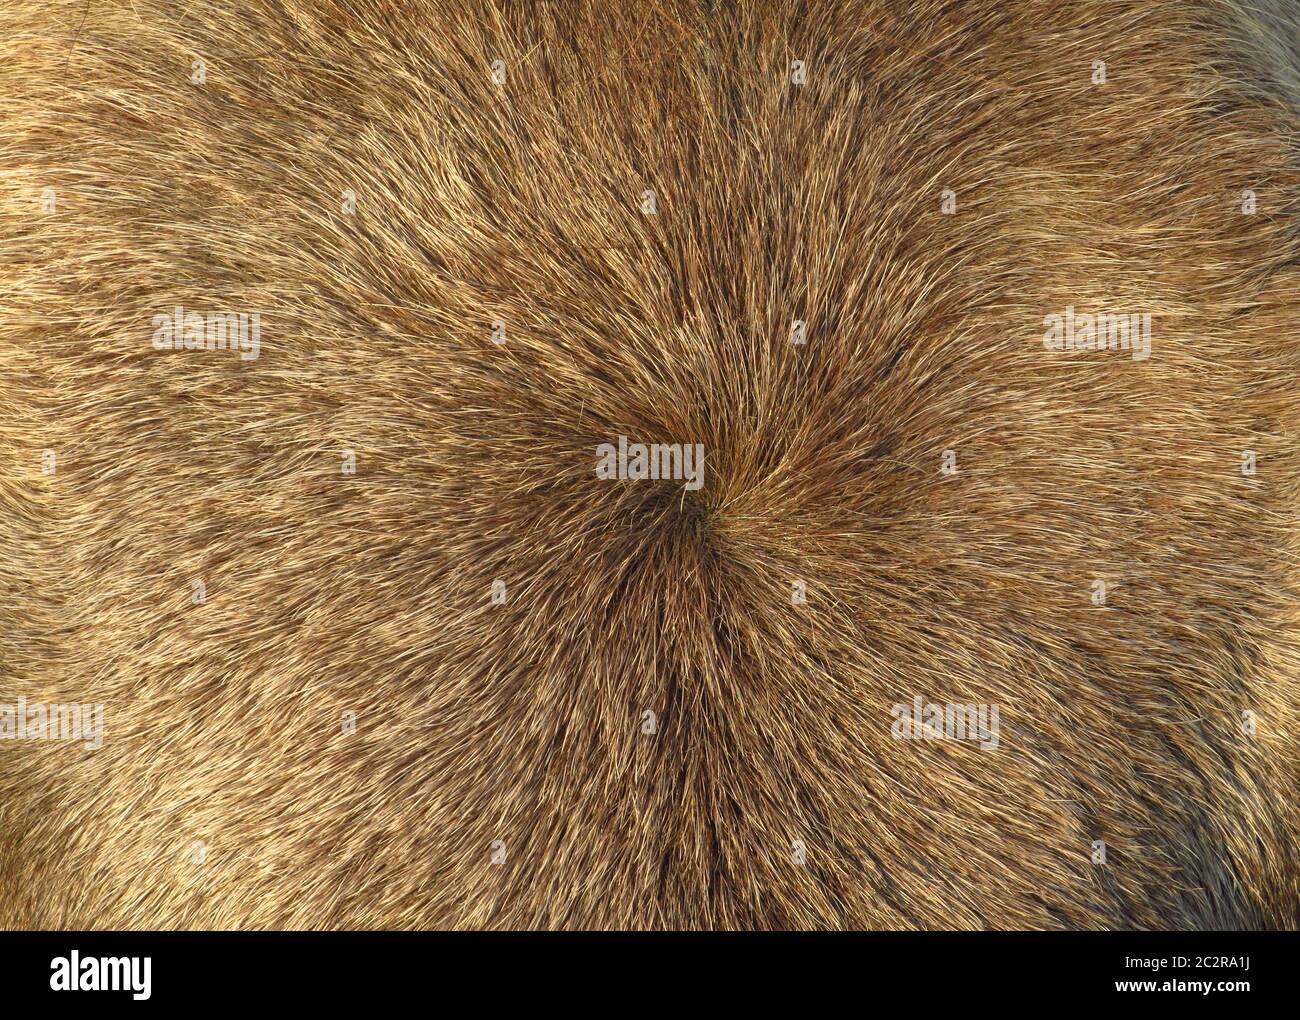 Skin whorl of a Konik horse in close up Stock Photo